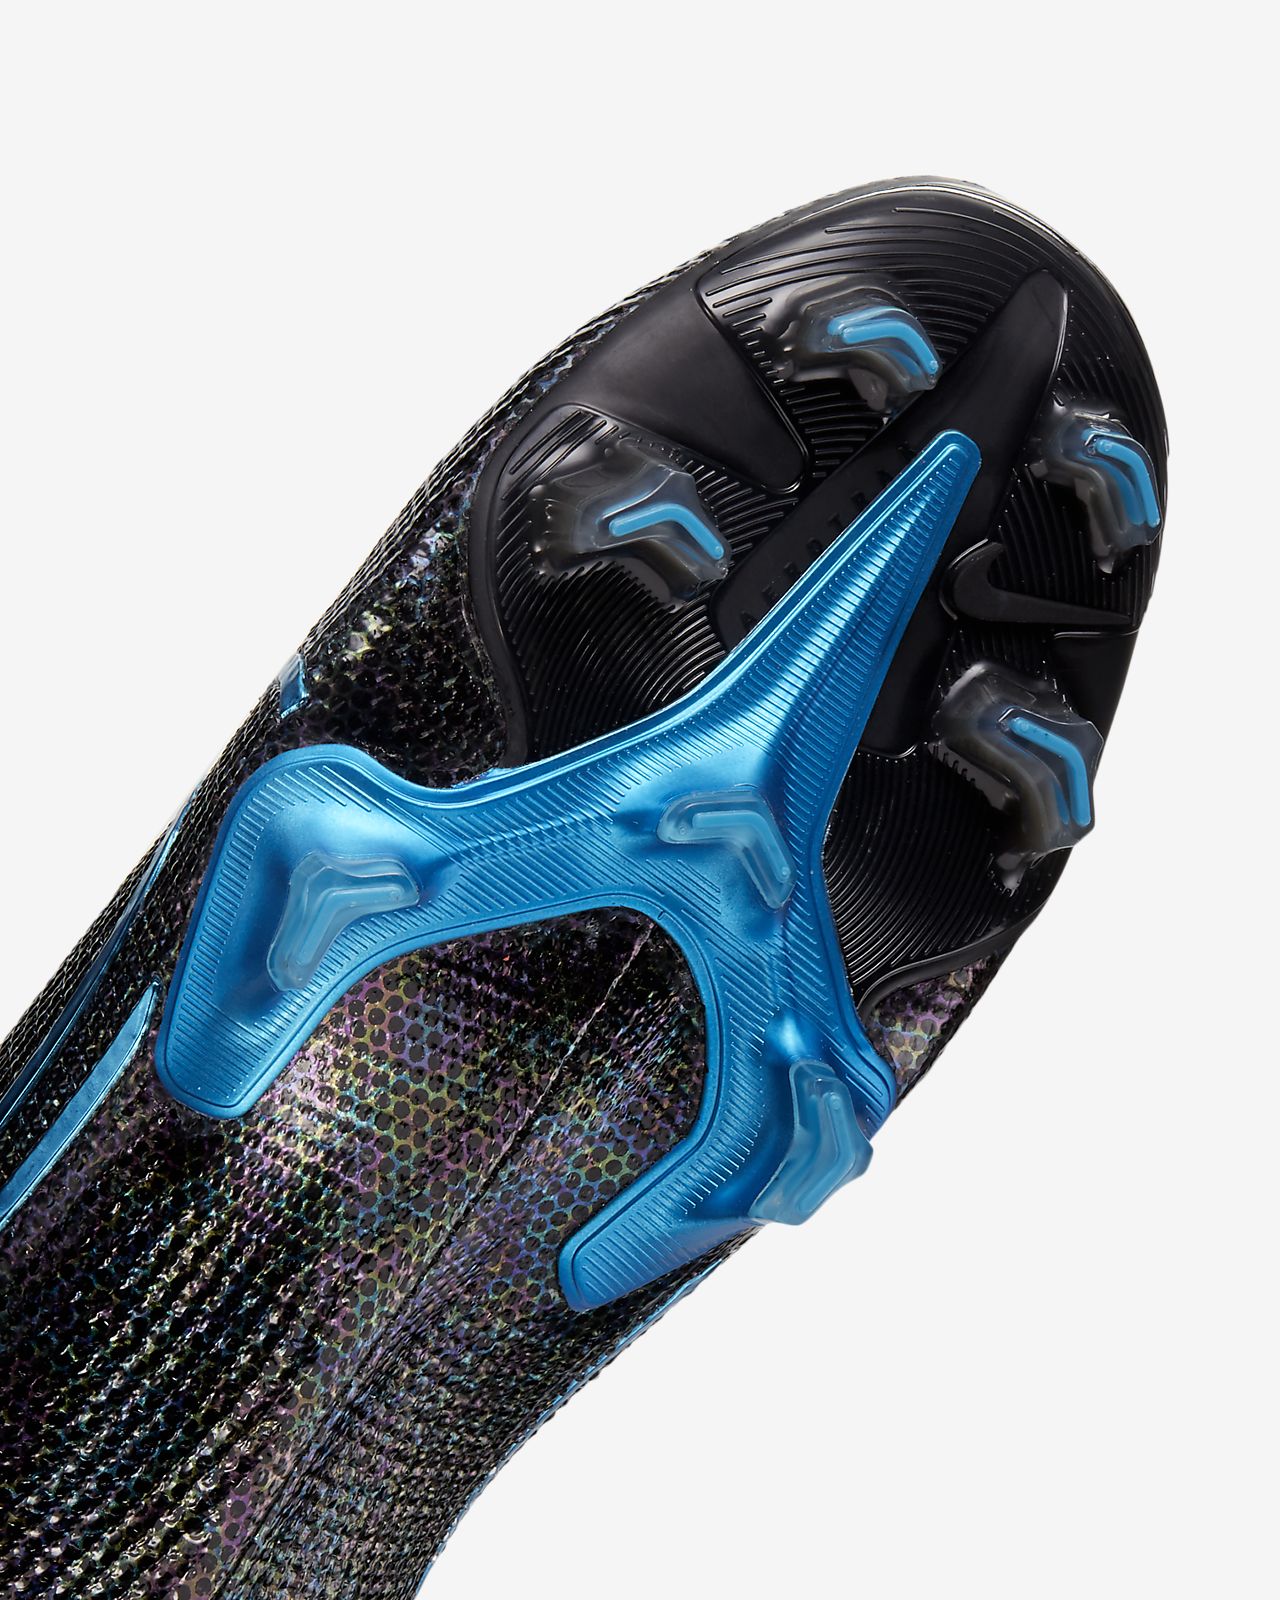 Superfly 6 Elite FG Game Over Firm Ground Football Boot.